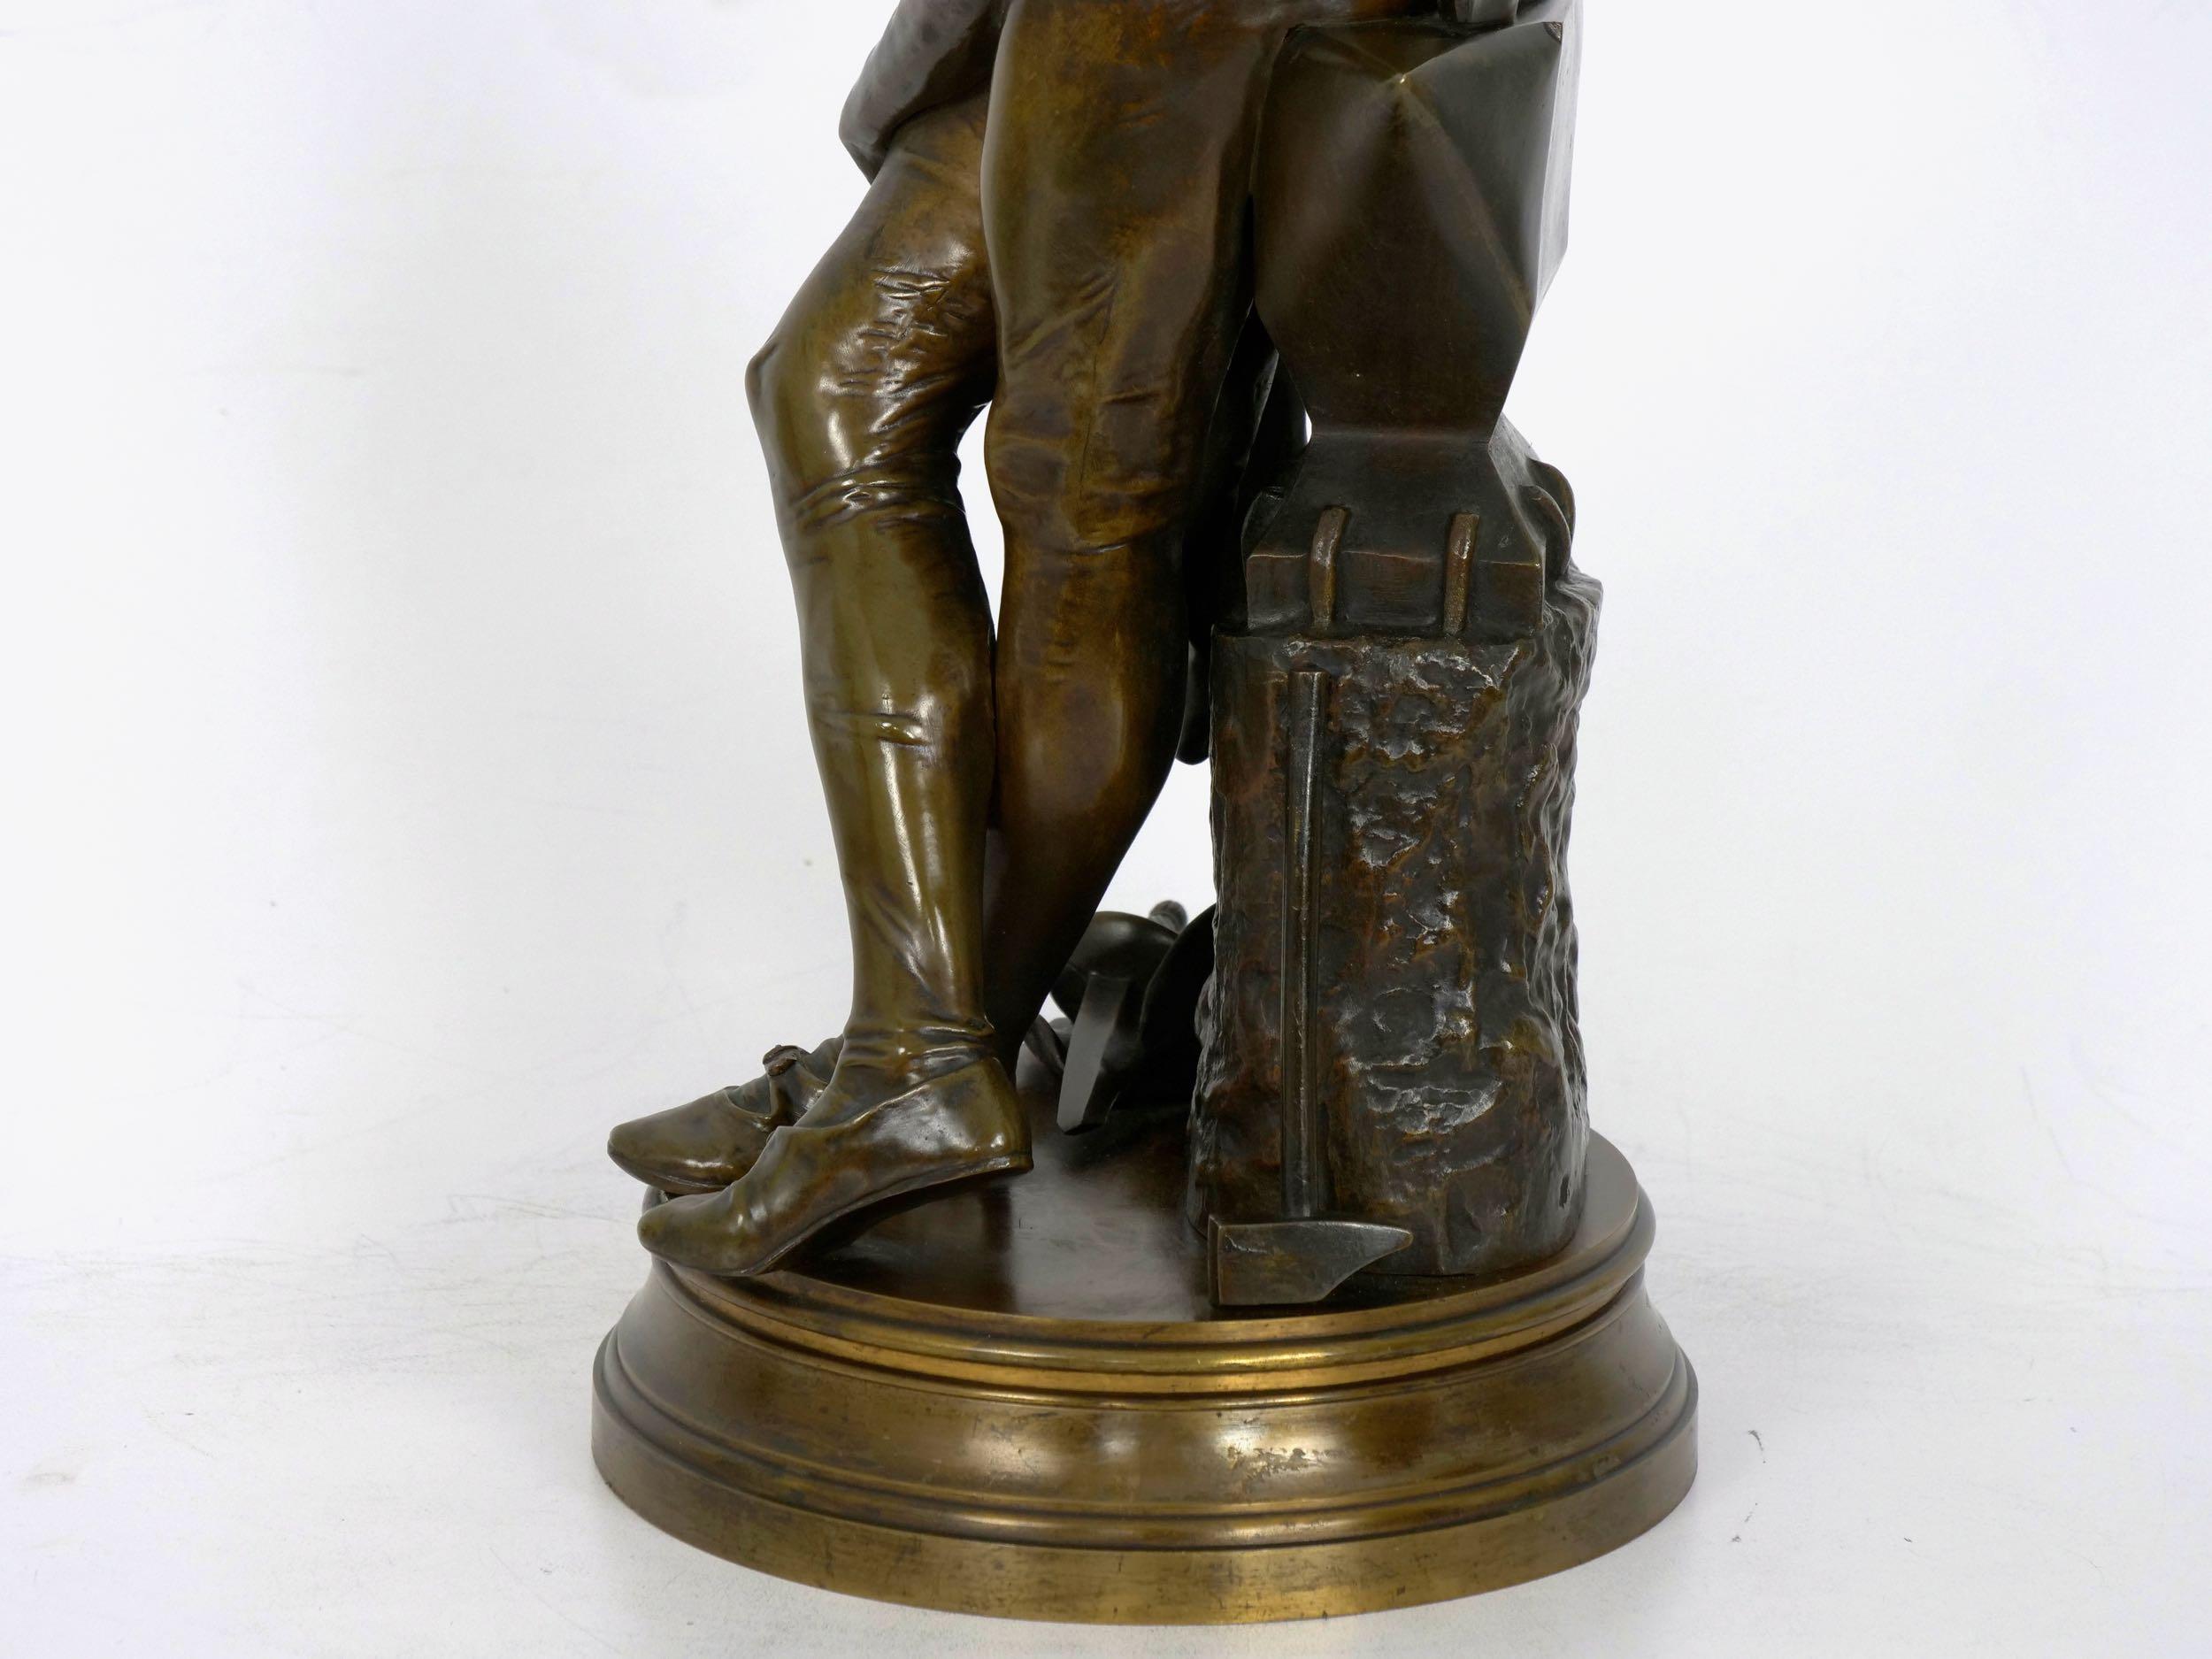 “A Young Bladesmith” French Antique Bronze Sculpture by Adrien-Étienne Gaudez 8